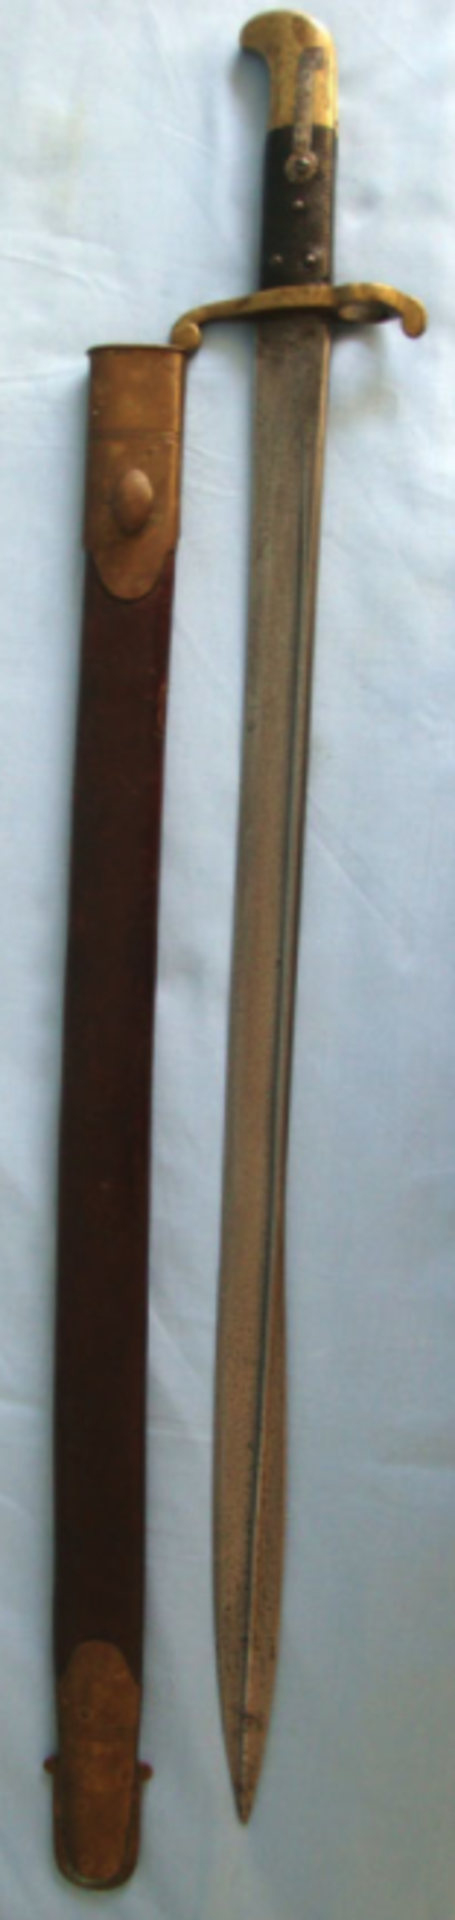 British Lancaster Sword Bayonet For The Royal Sappers and Miners Carbine of 1855 - Image 3 of 3